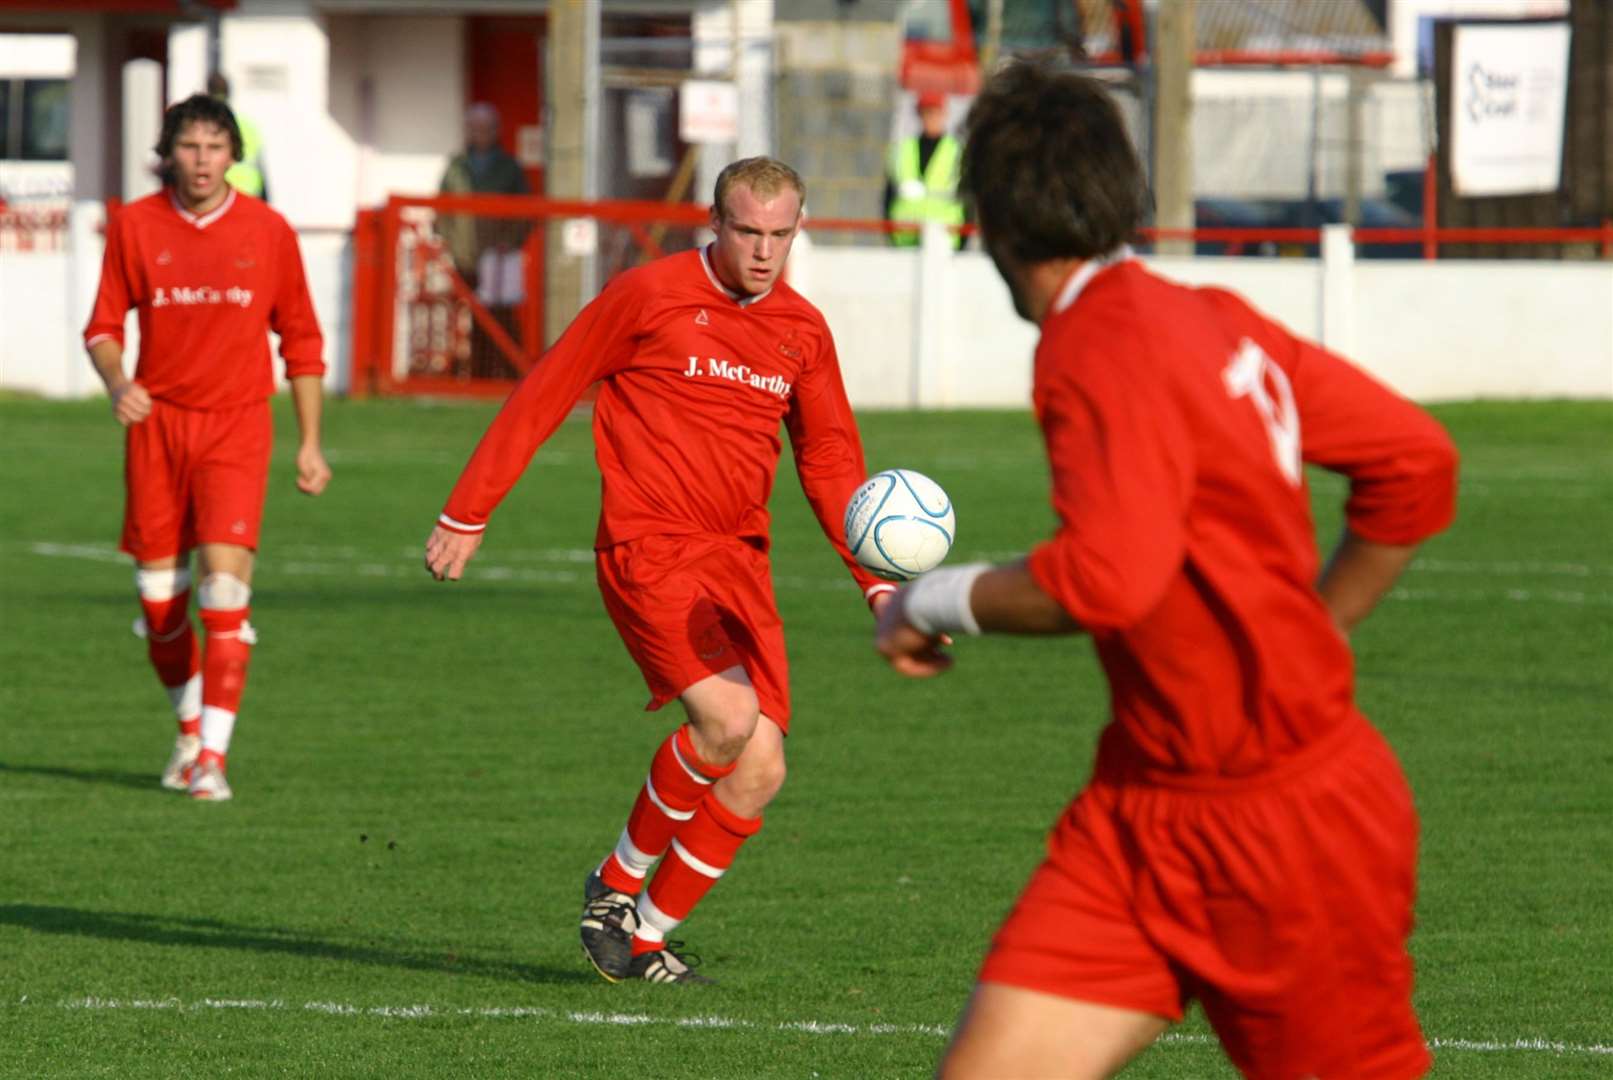 Lee Minshull on the ball for Ramsgate during his Southwood years.